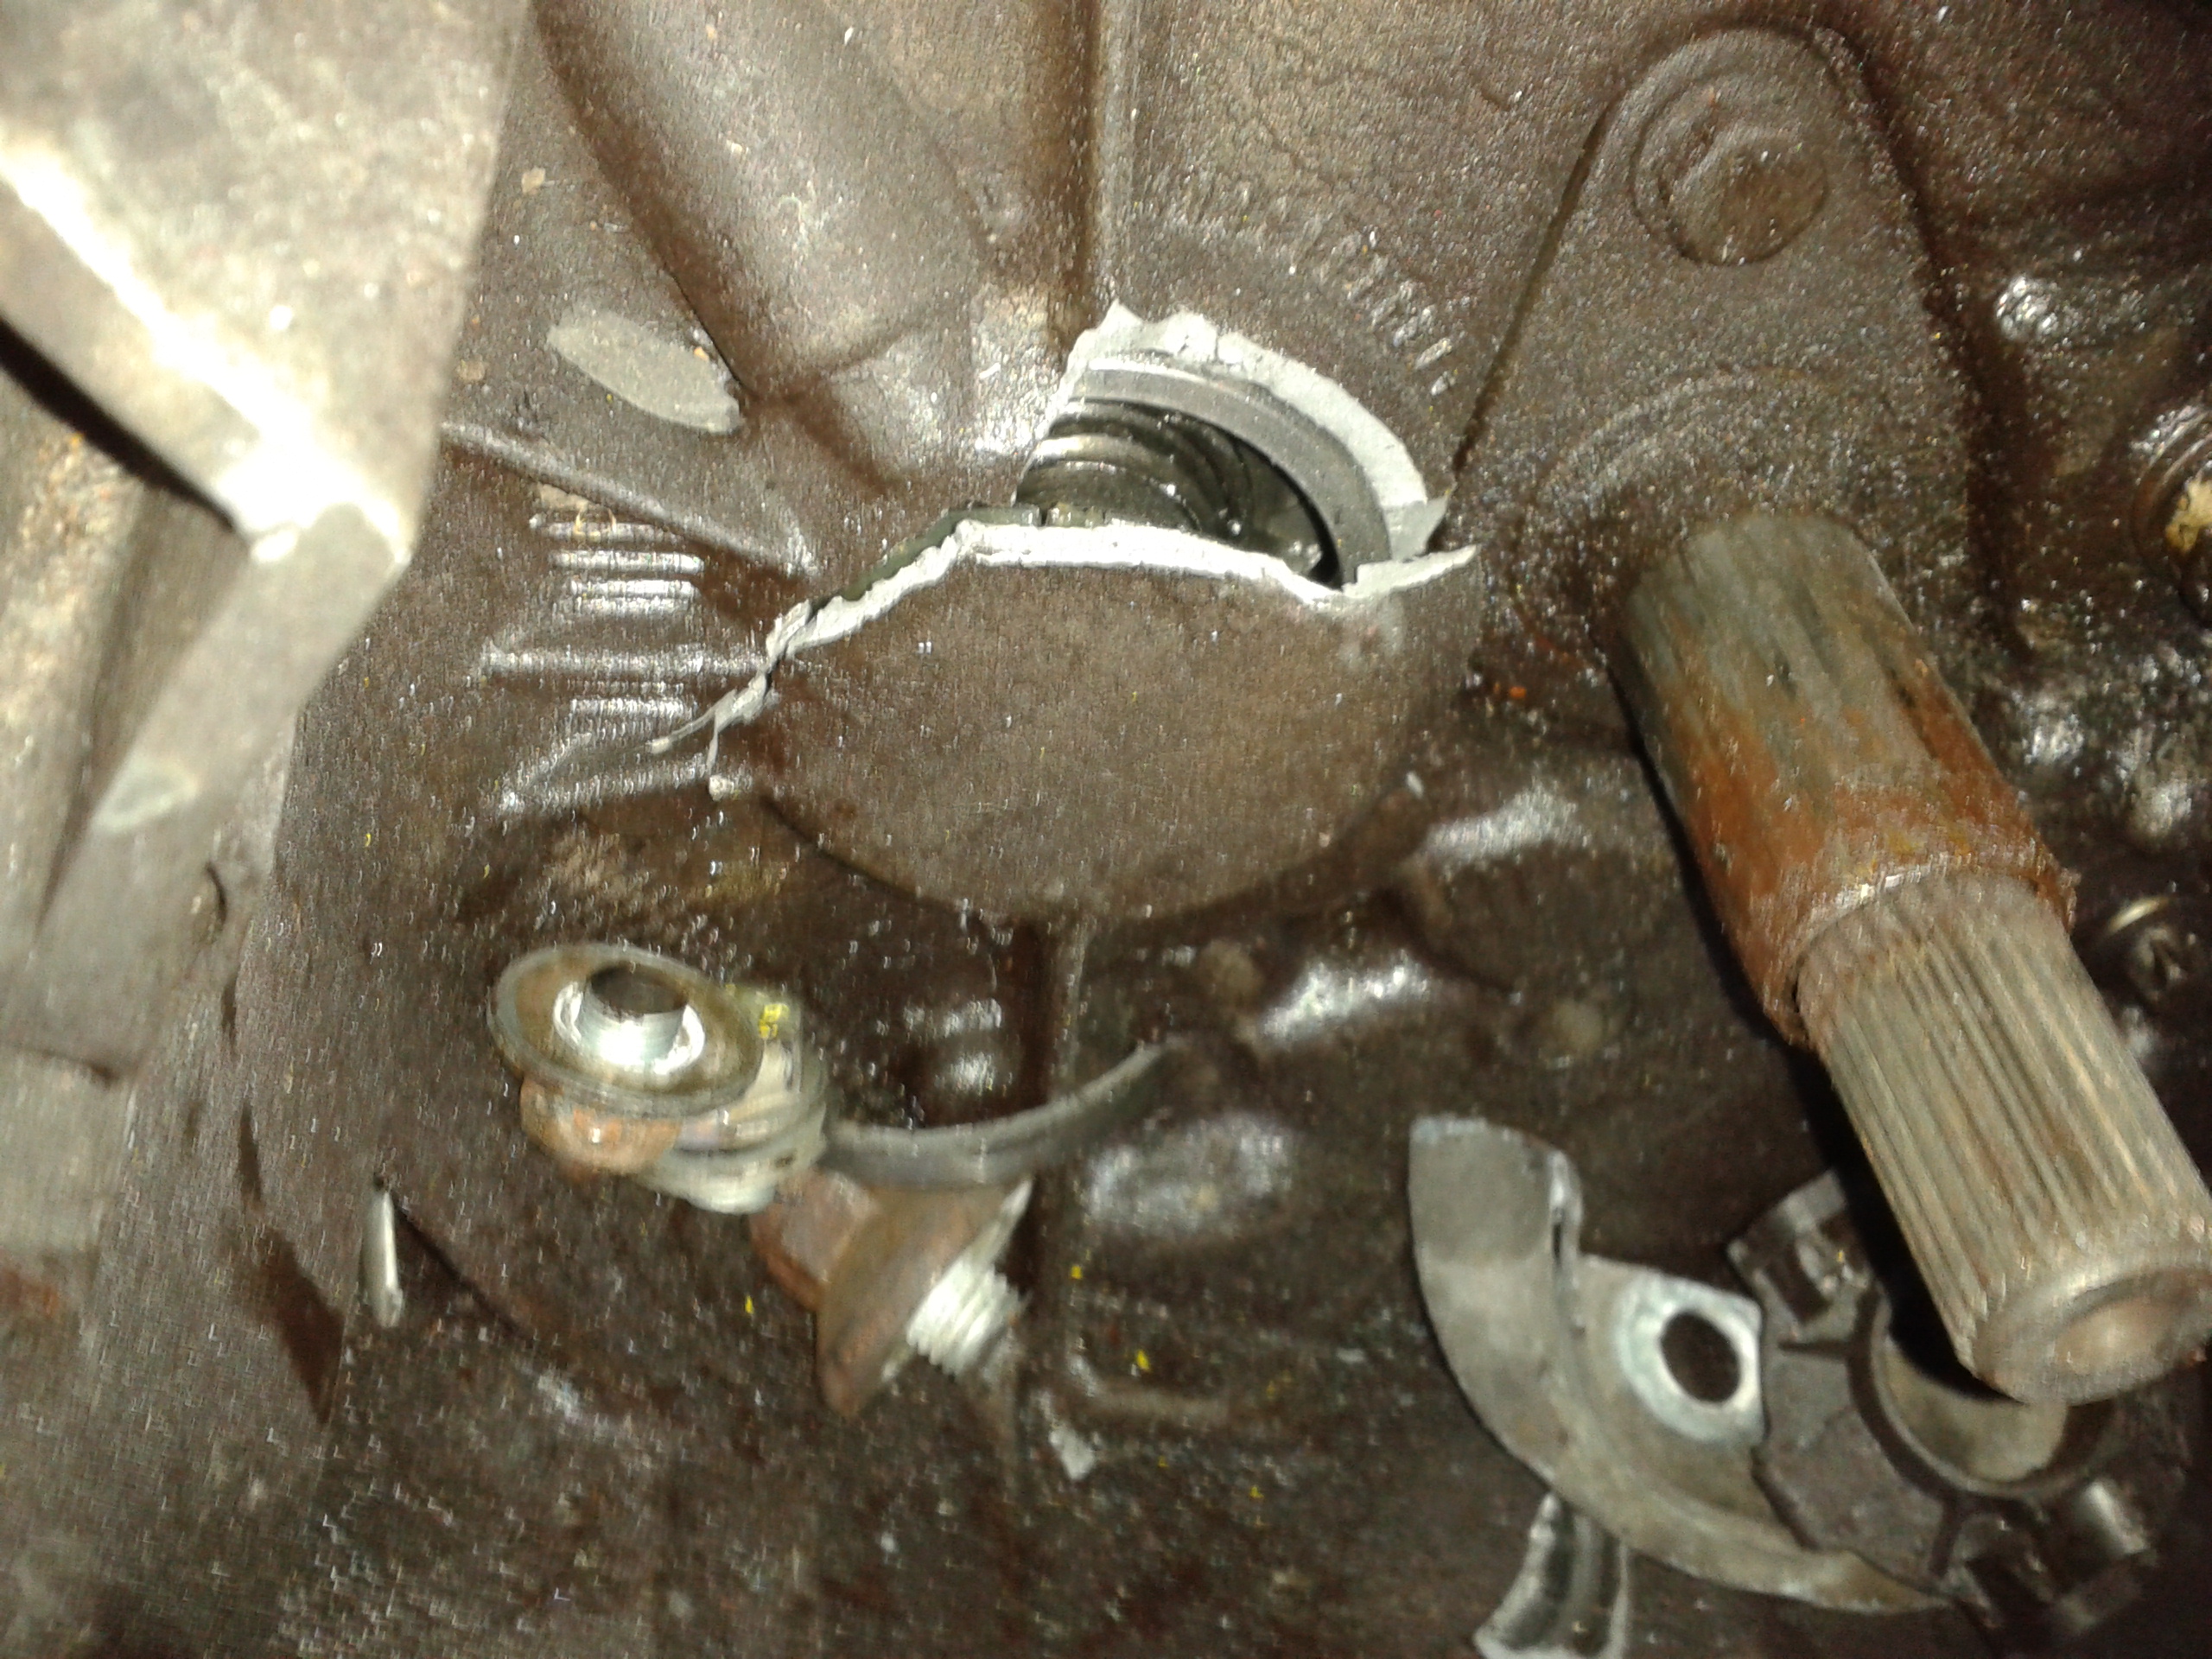 SMASHED GEARBOX 1.jpg